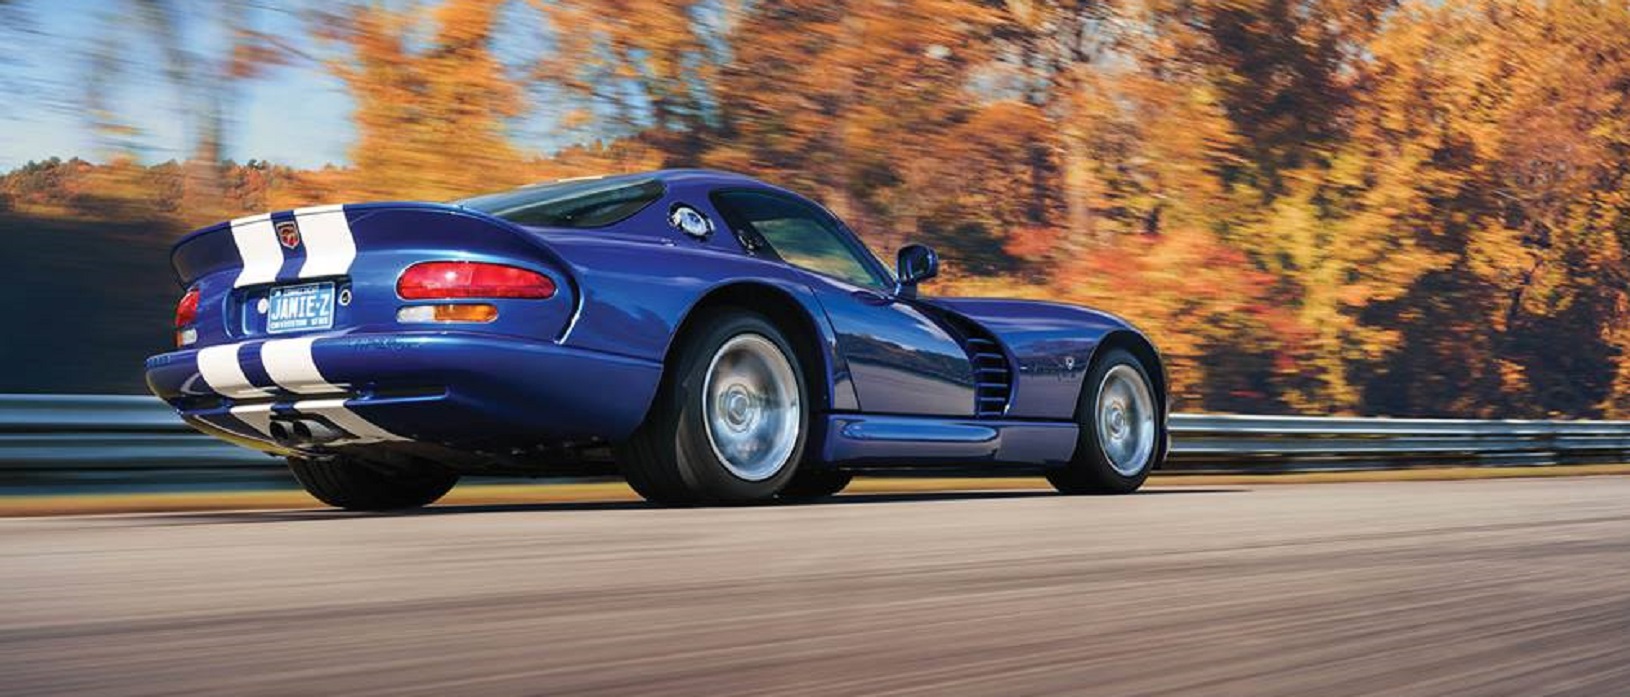 Hagerty’s 2020 Bull Market List is In and the Viper Takes Center Stage